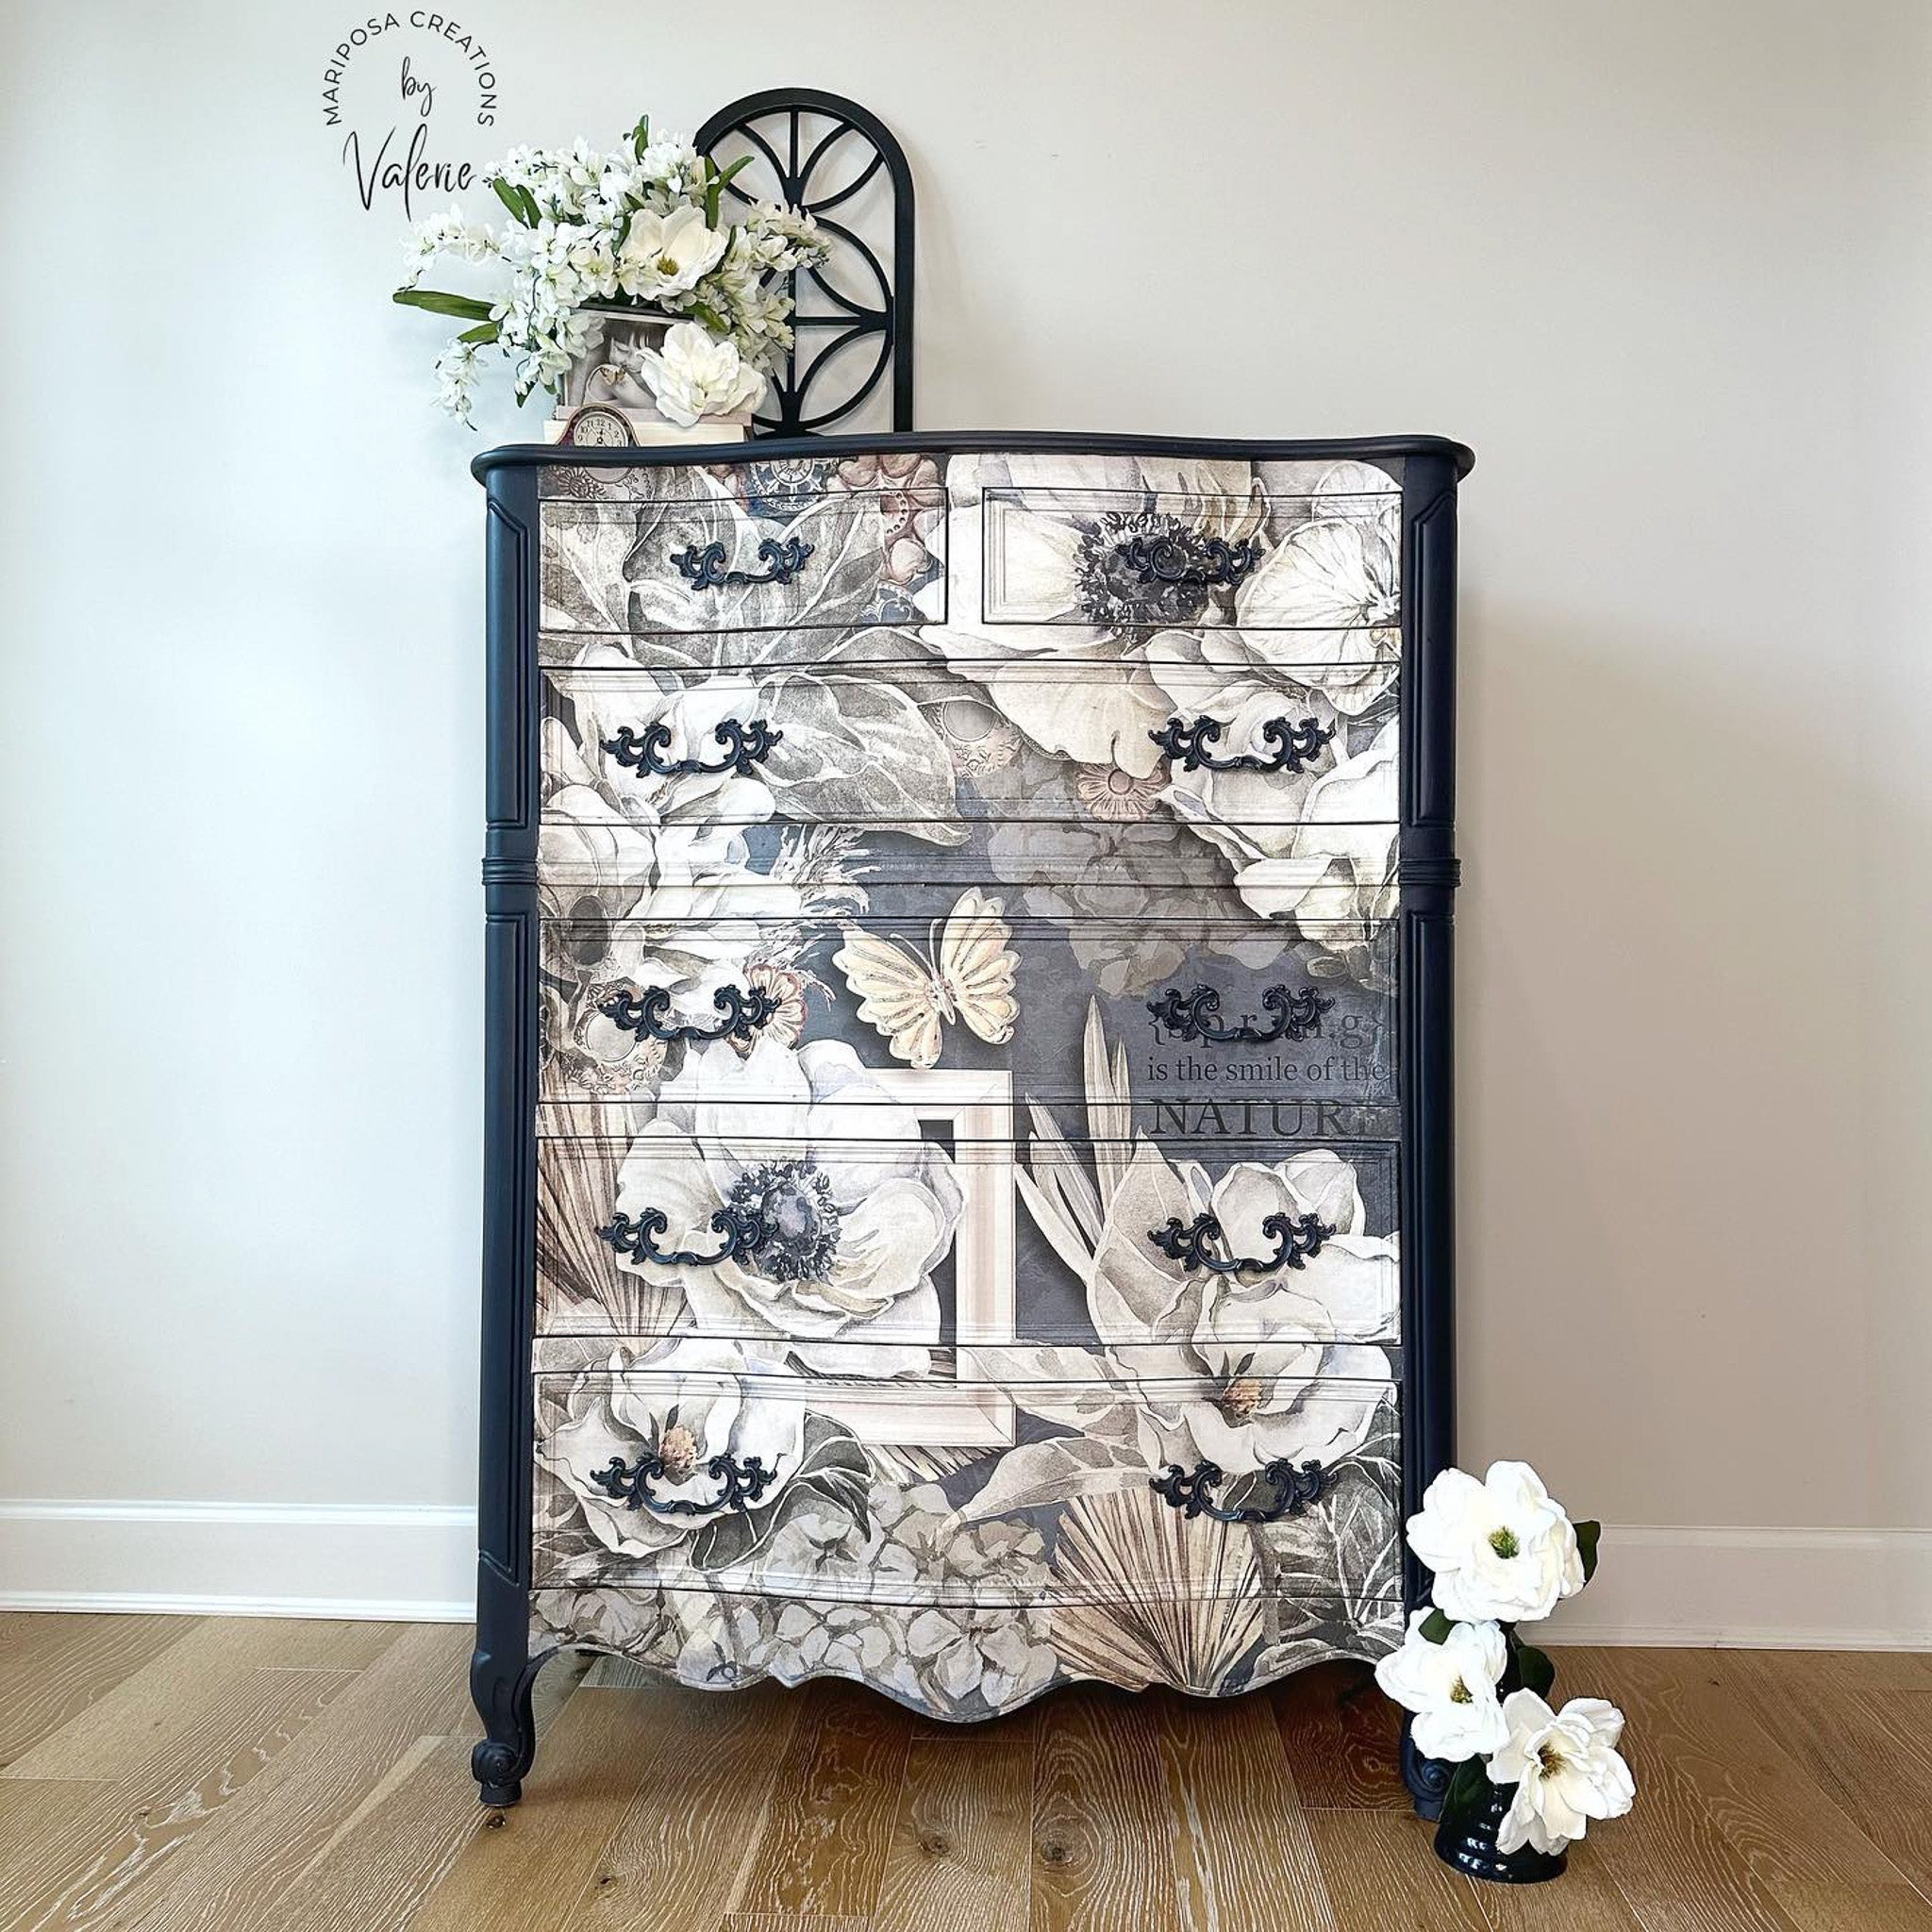 A vintage chest dresser refurbished by Mariposa Creations by Valerie is painted navy blue and features Decoupage Queen's Sugar Magnolia A2 rice paper on the whole front side.